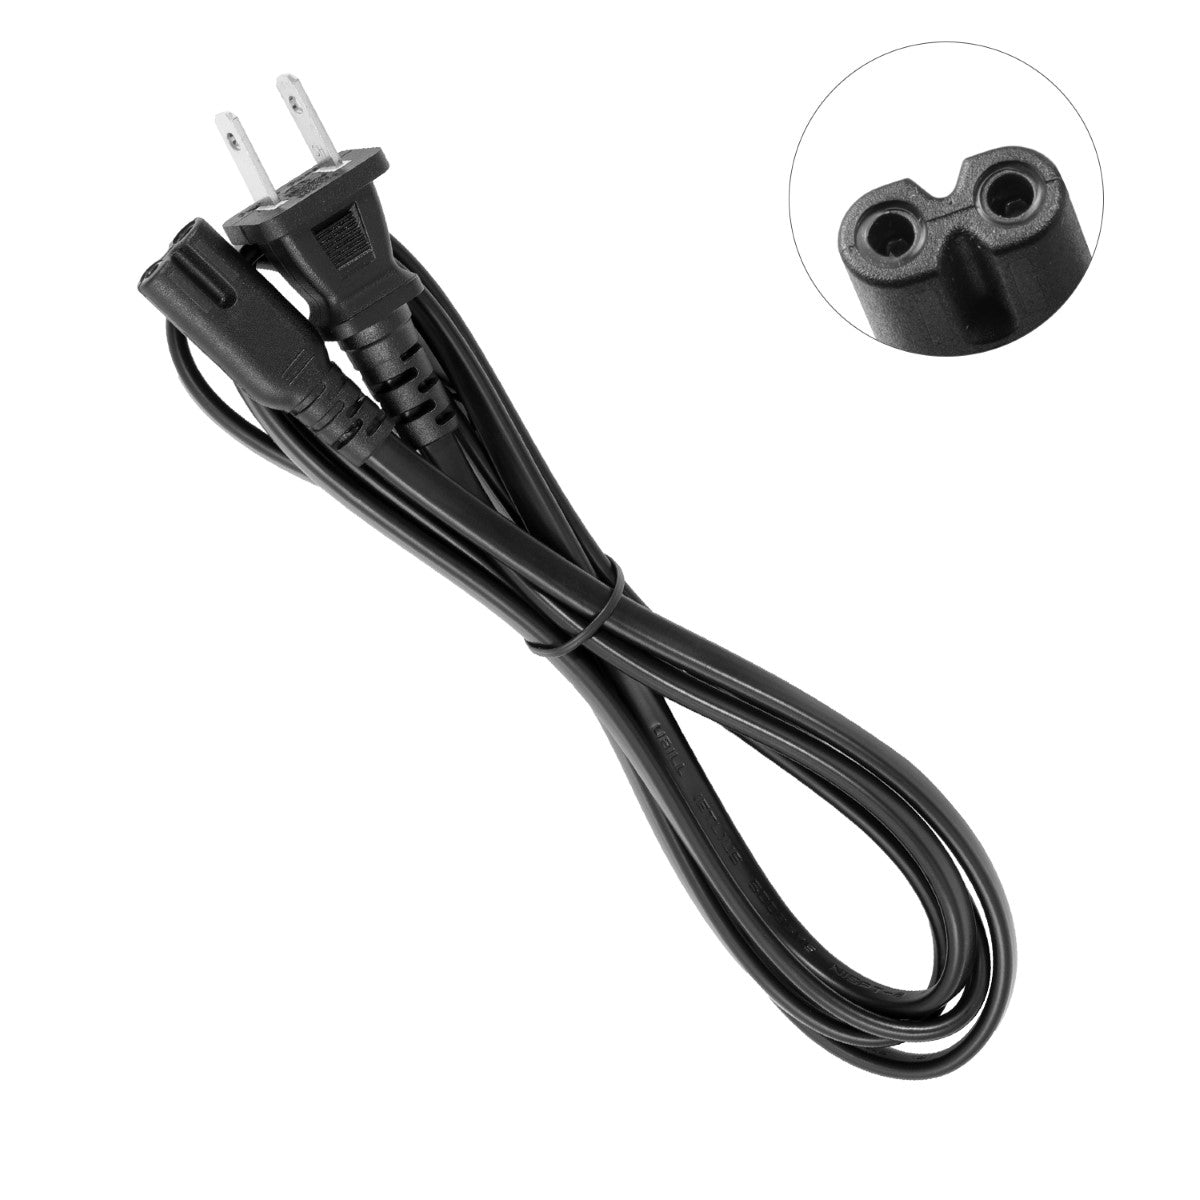 Power Cord for HP ENVY 5531 e-All-in-One Printer.